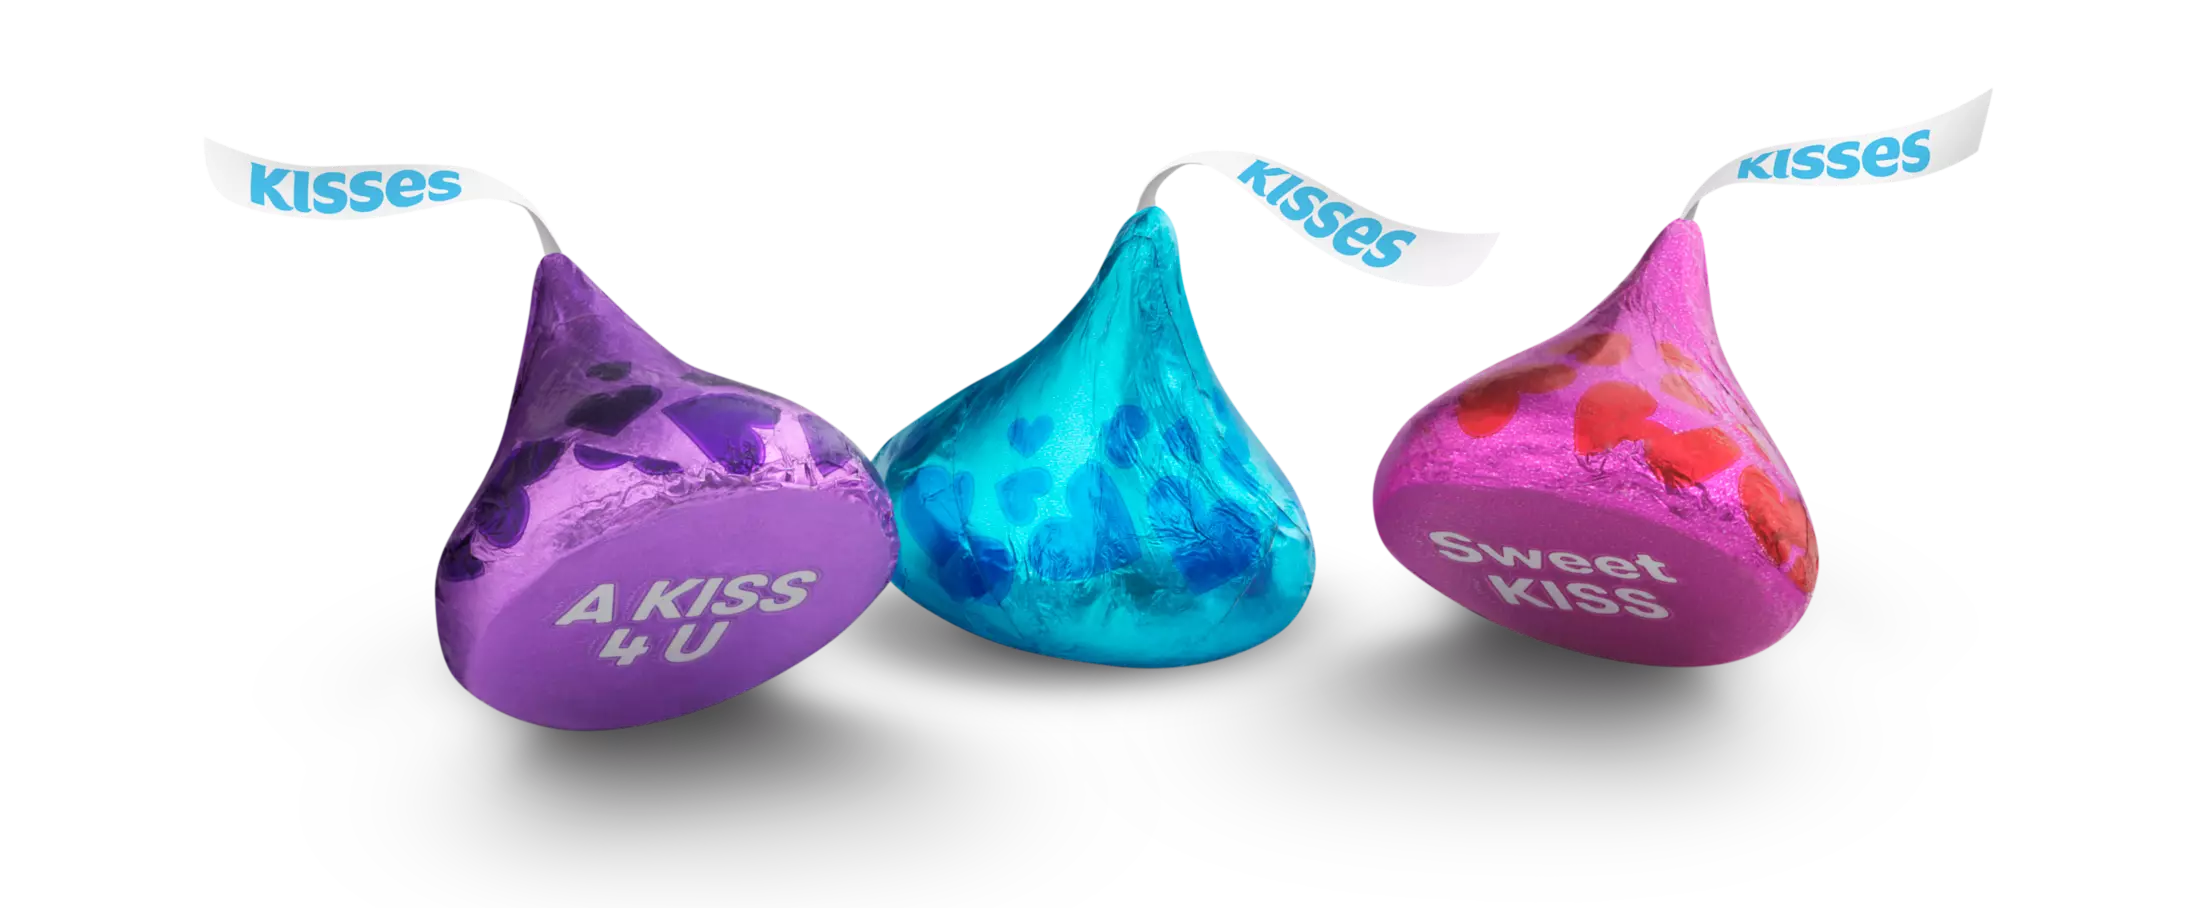 HERSHEY'S KISSES Conversation Foils Milk Chocolate Candy, 10.1 oz bag - Out of Package